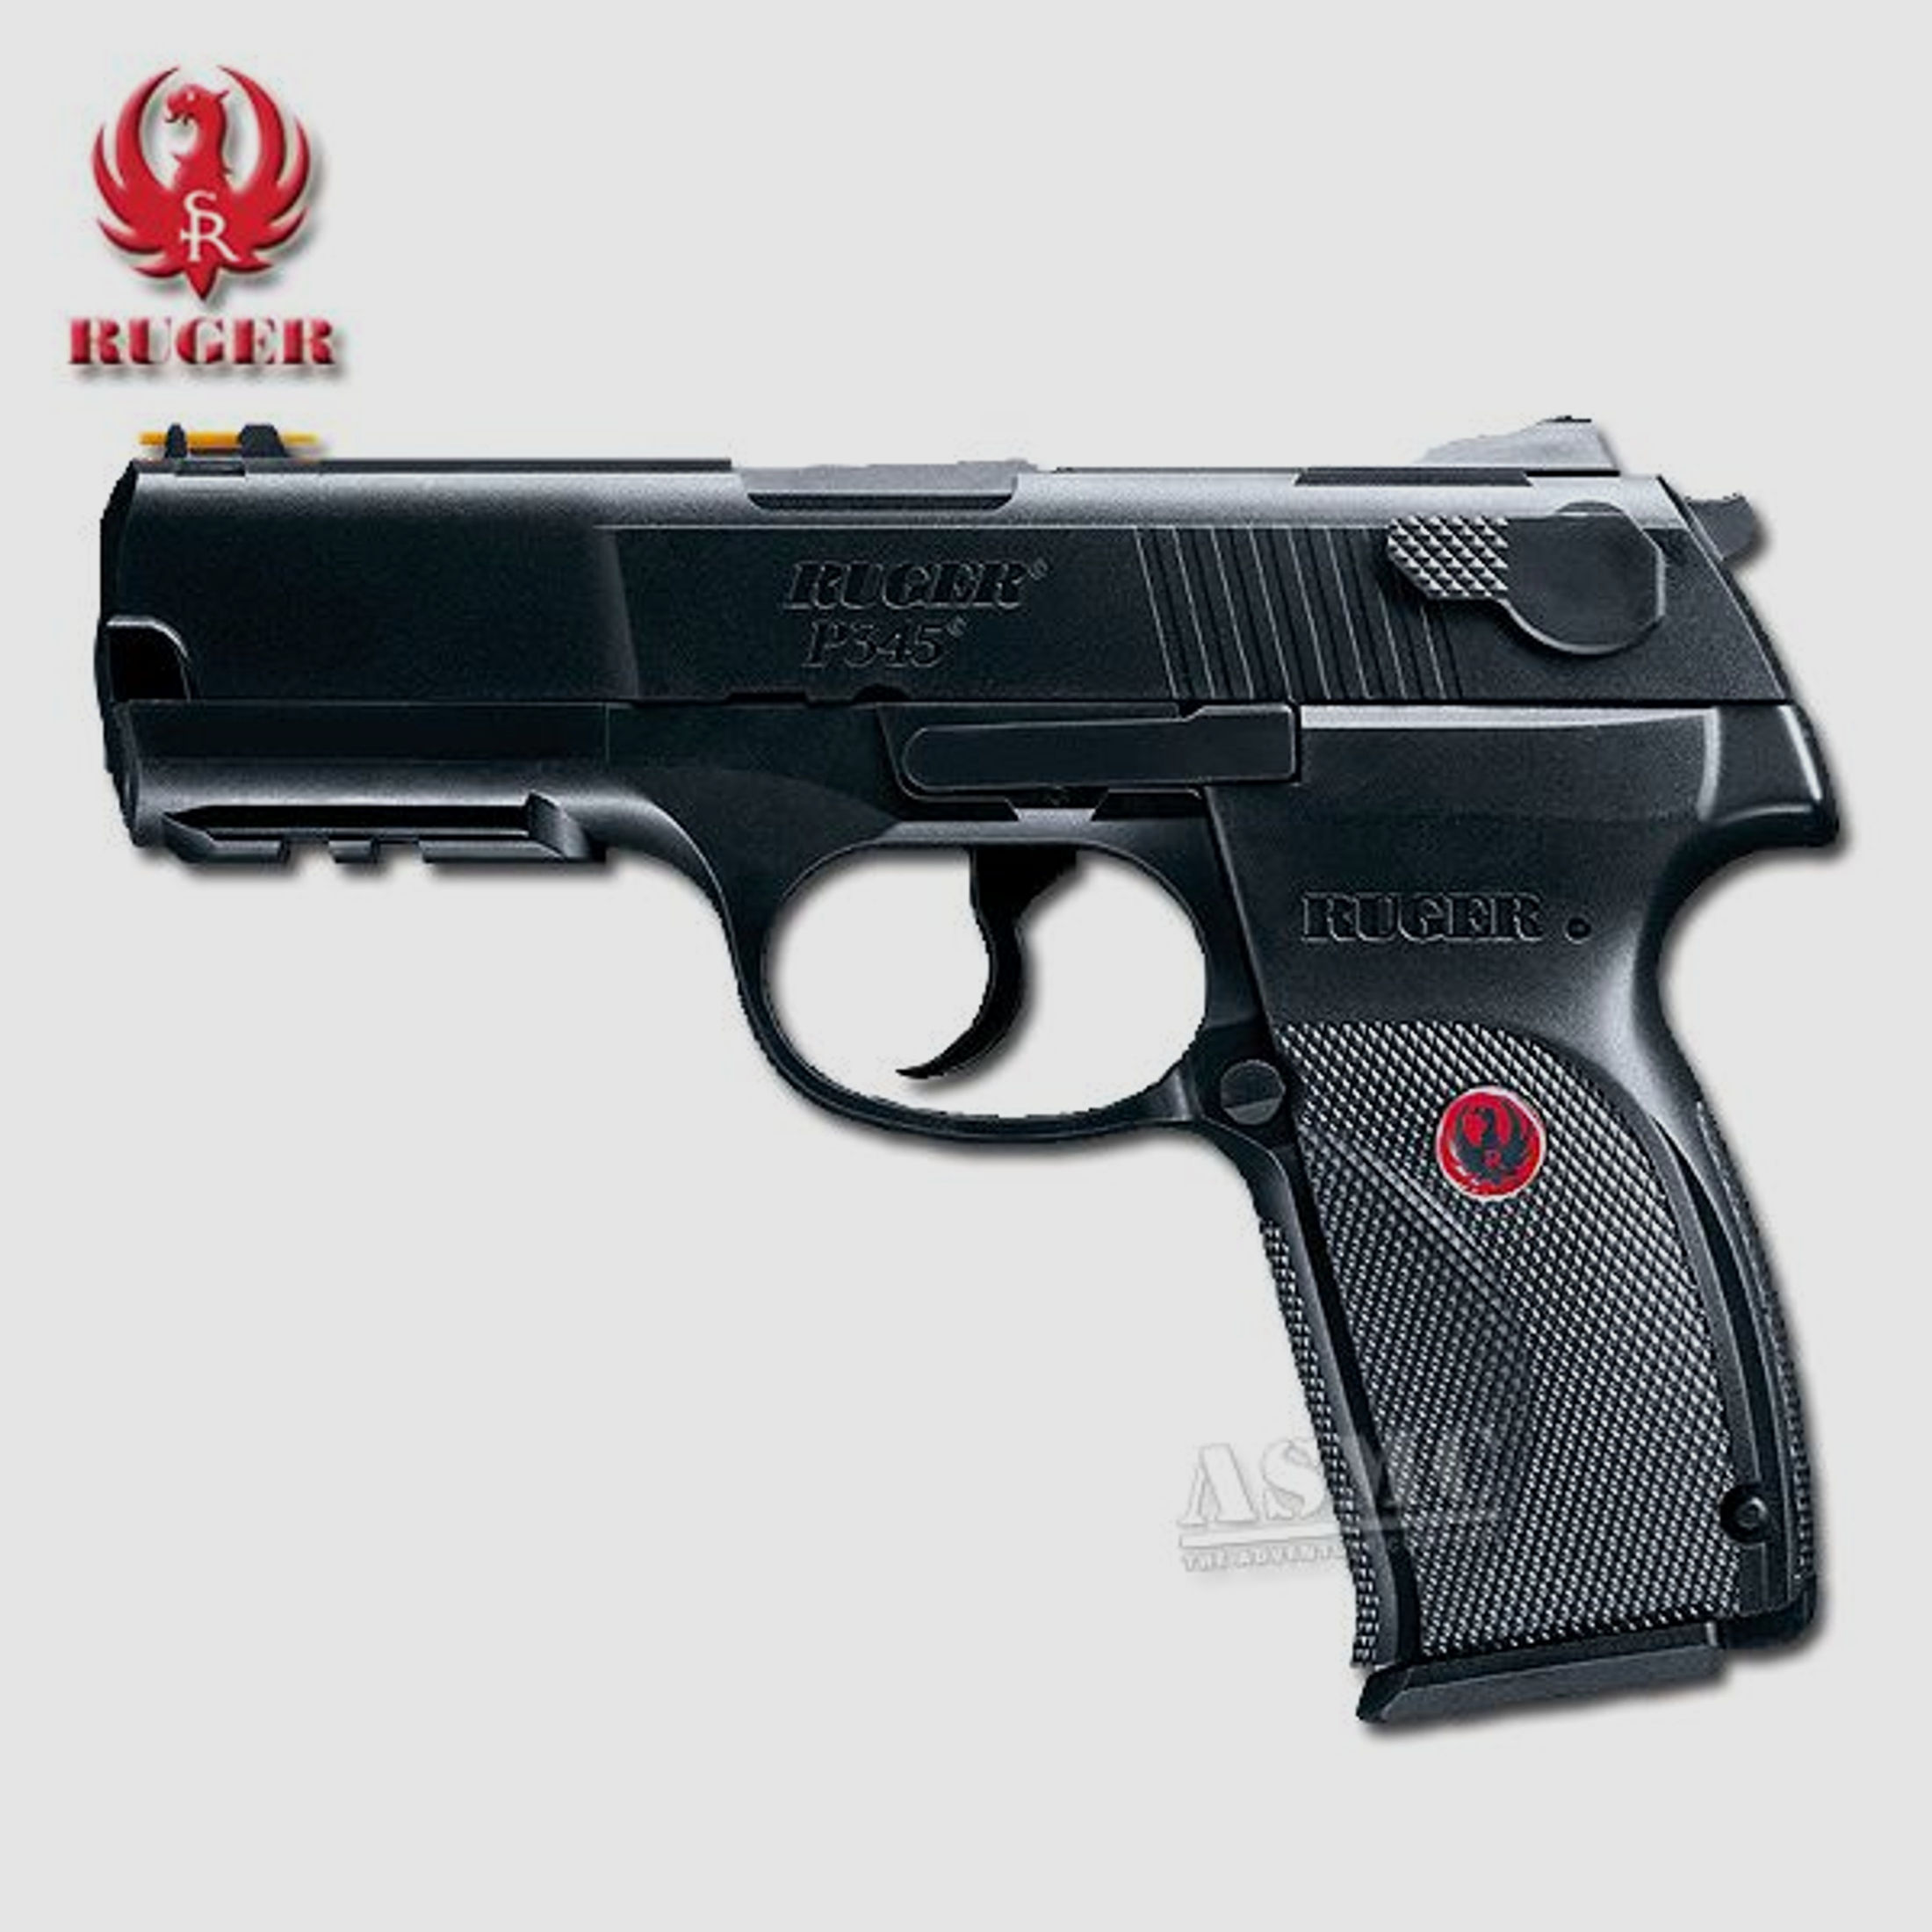 Ruger Pistole Softair Ruger P345